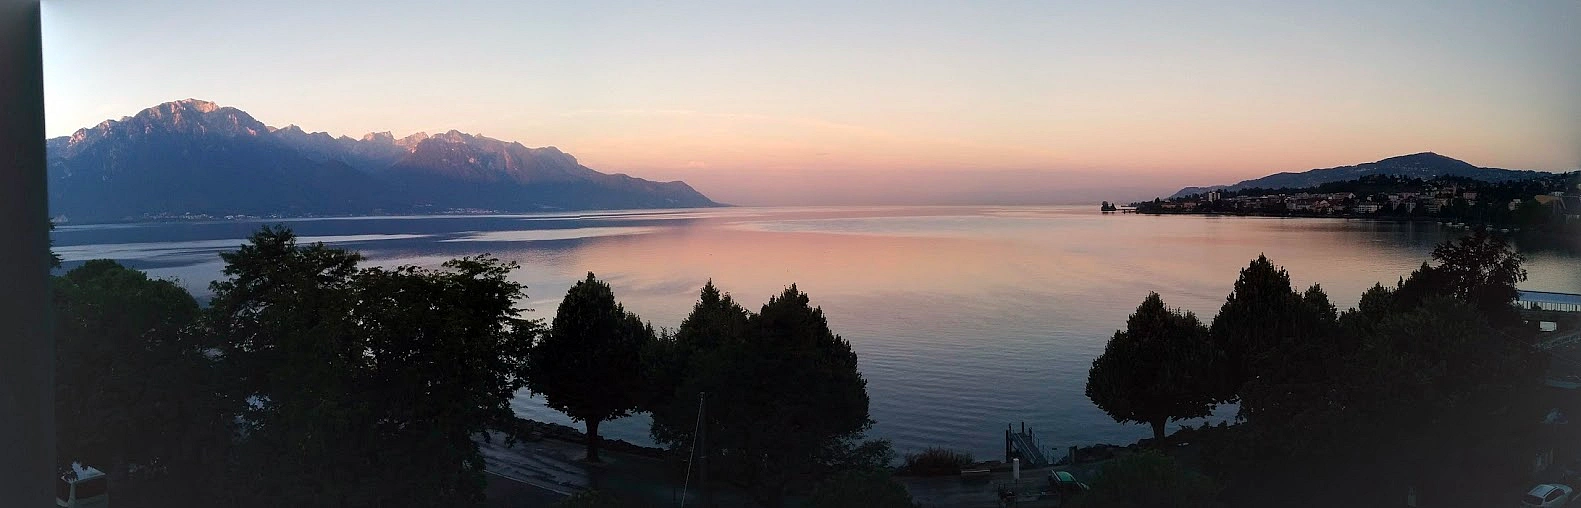 View on the lake Geneva from Montreux